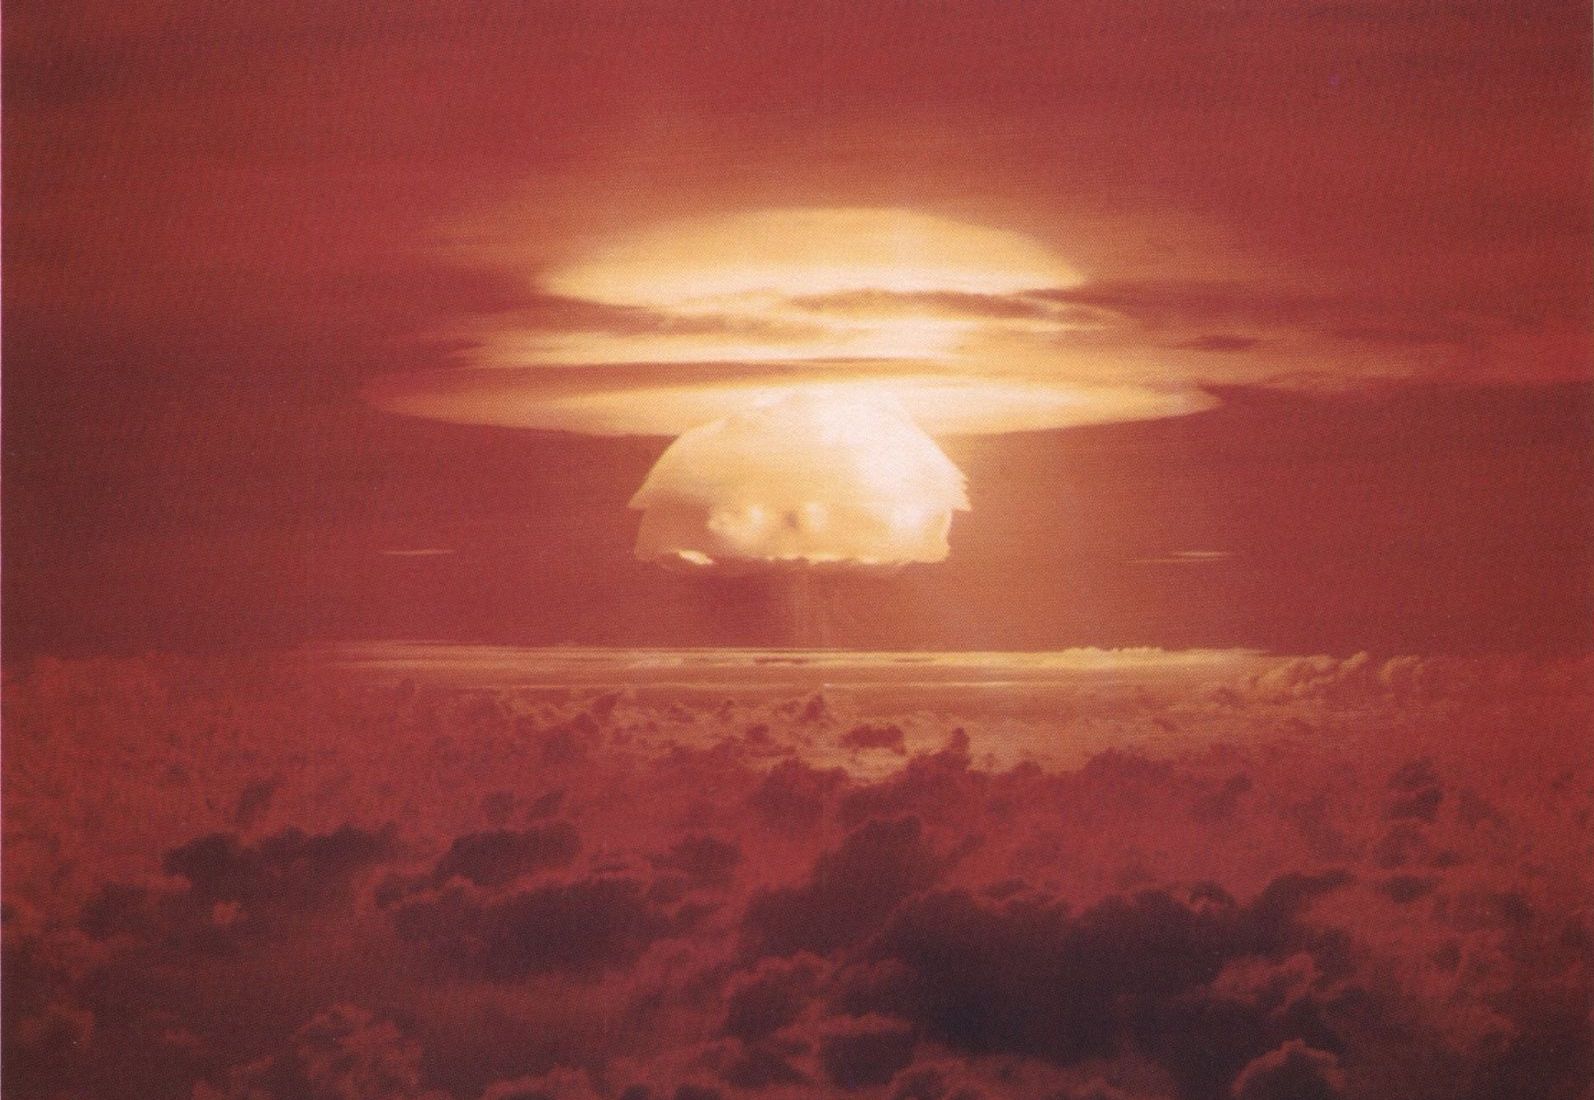 The 1954 Castle Bravo test produced an estimated yield of 15 megatons.